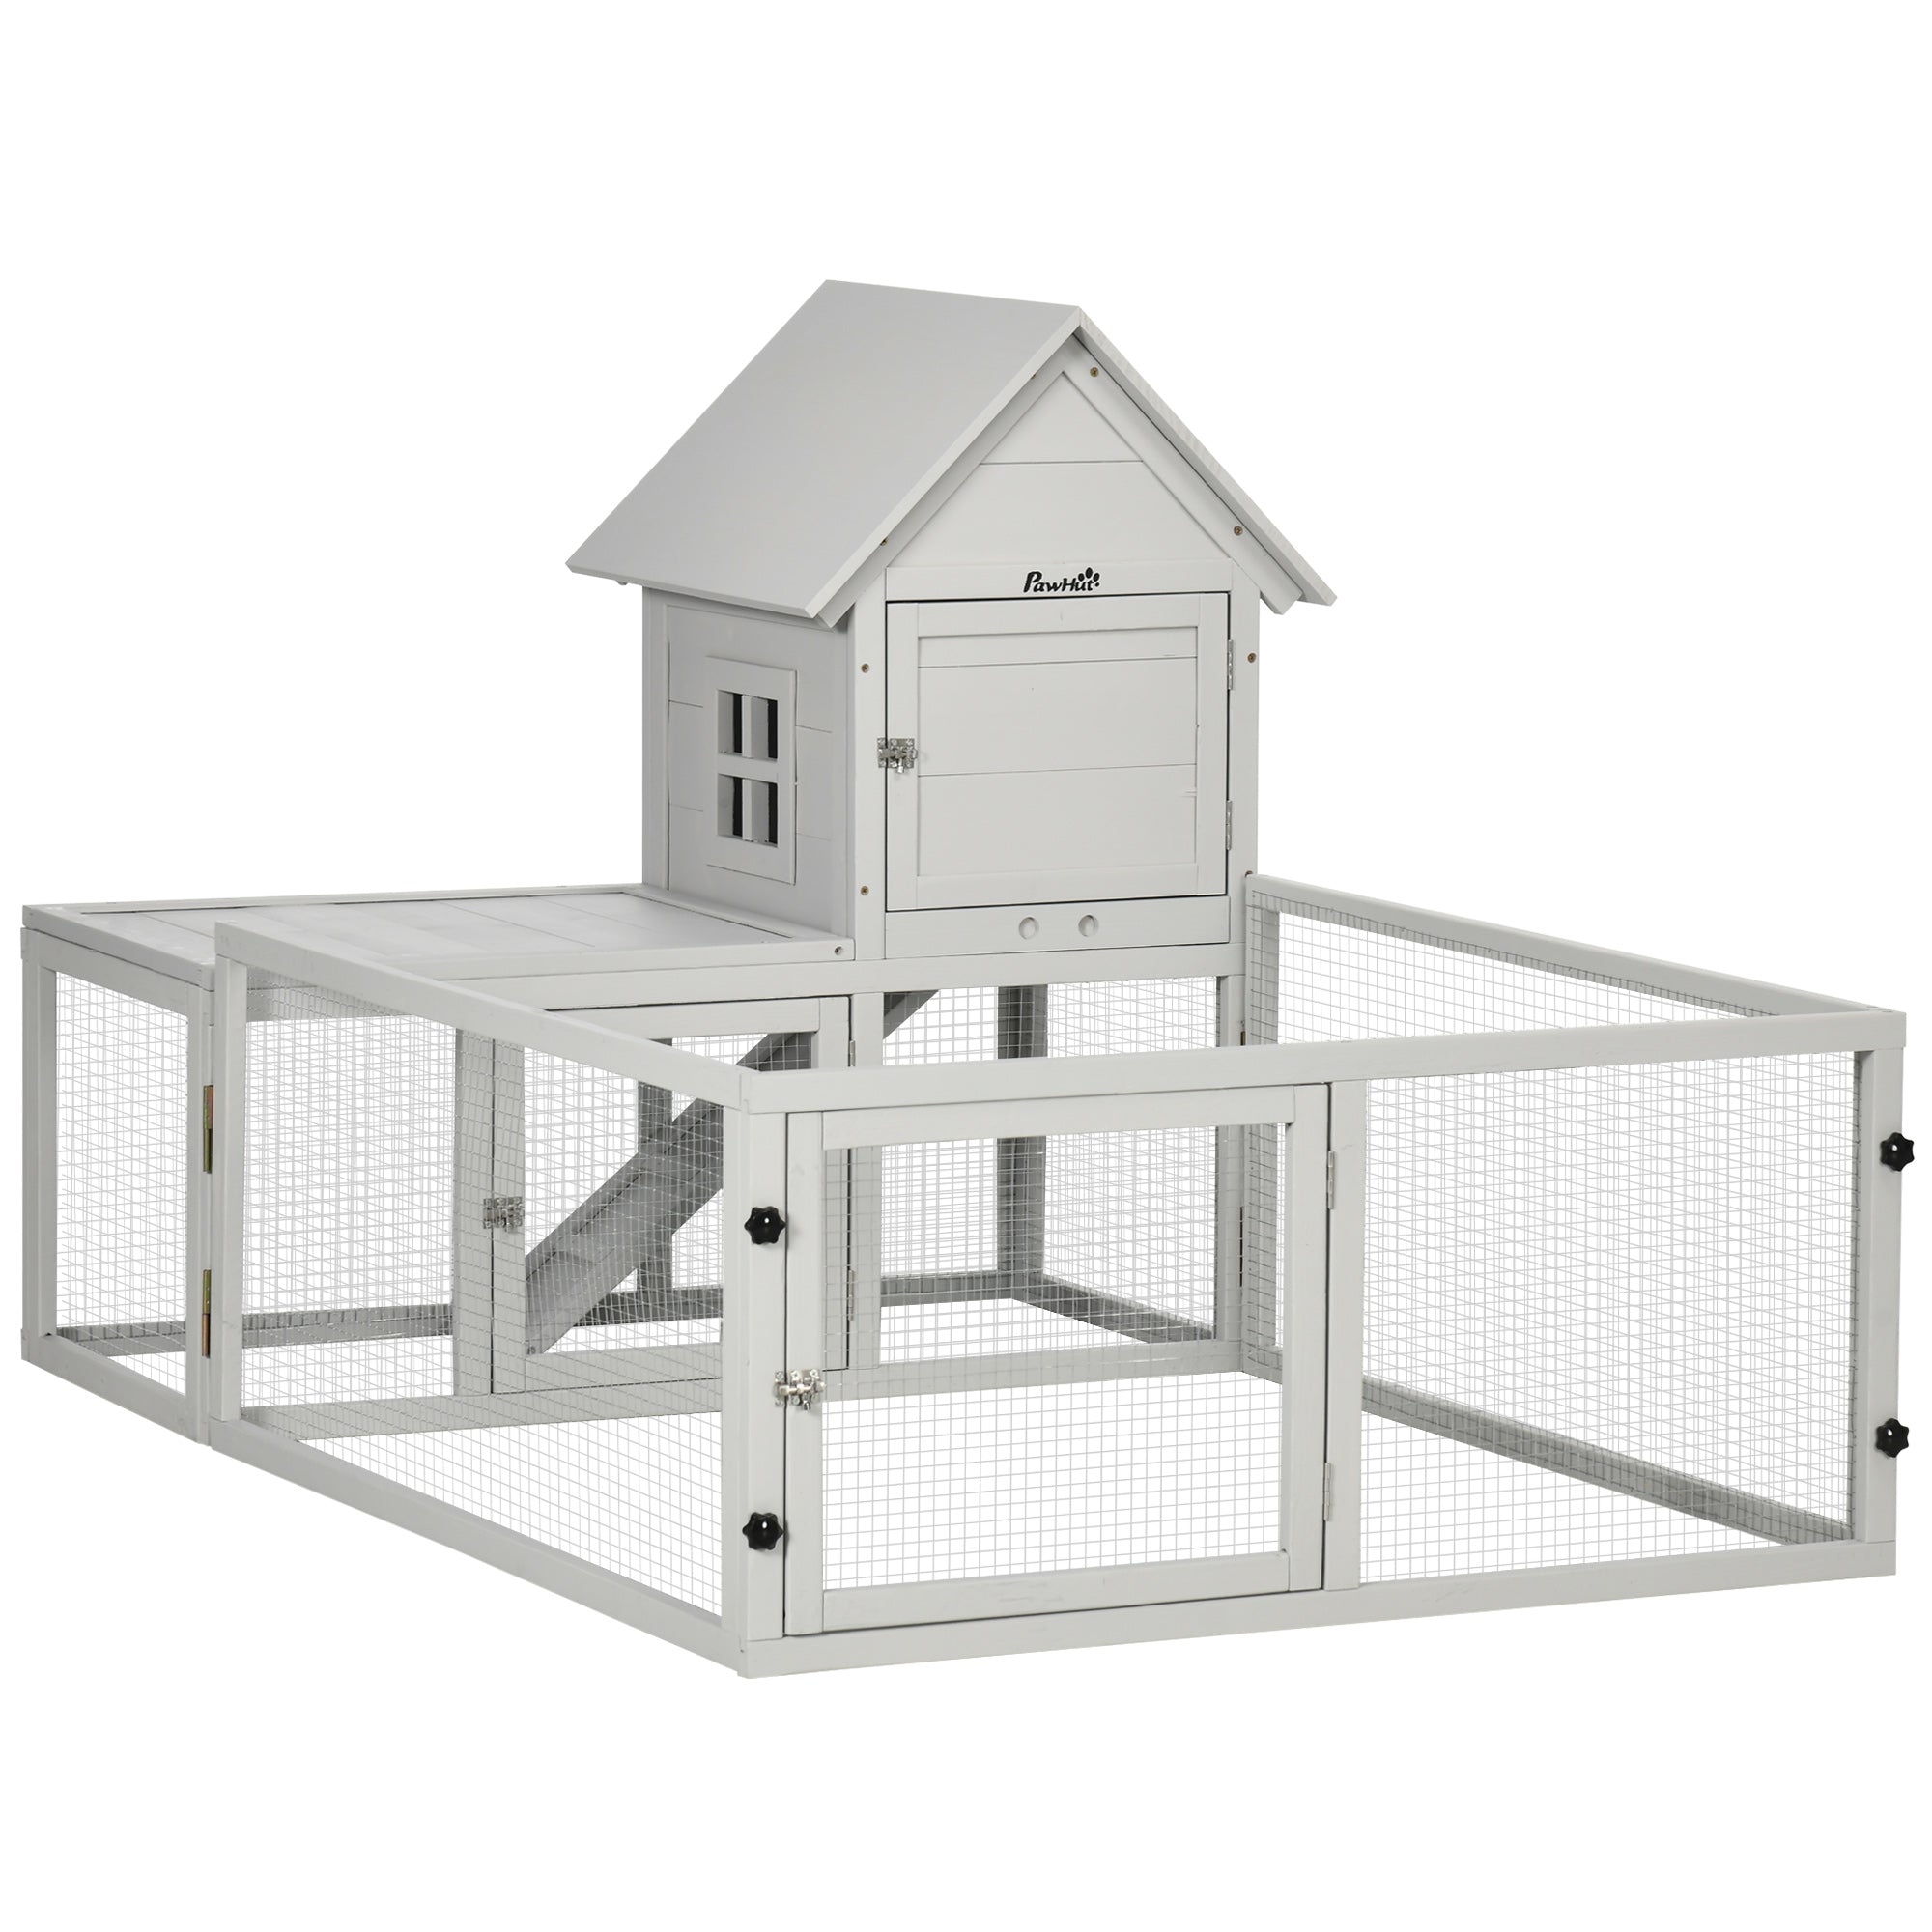 Wooden Rabbit Hutch with Extra Fenced Area, Large Guinea Pig Cage, Small Animal House for Indoor with Slide-out Tray, 151.5 x 106 x 97cm, Light Grey, PawHut,